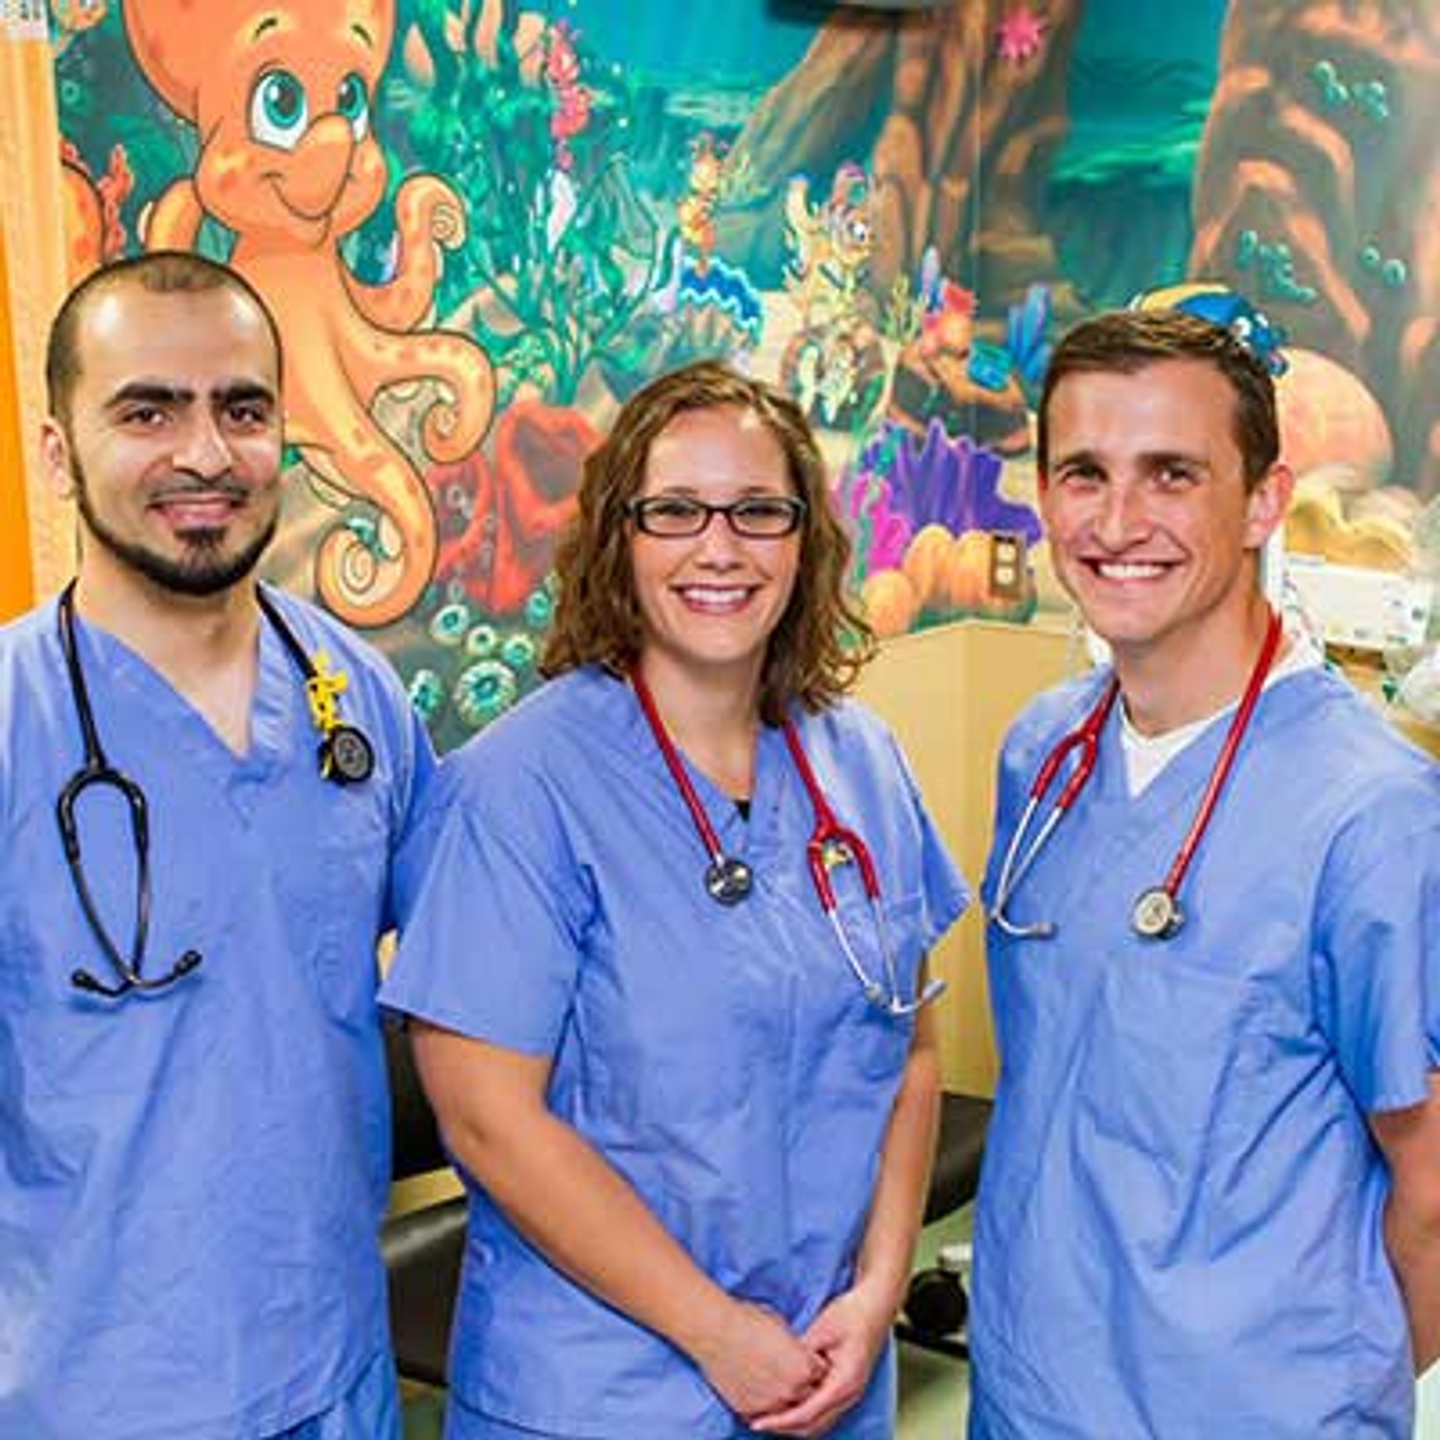 Three staff members of Gulf Coast Hospital posing in front of an ocean-themed mural.